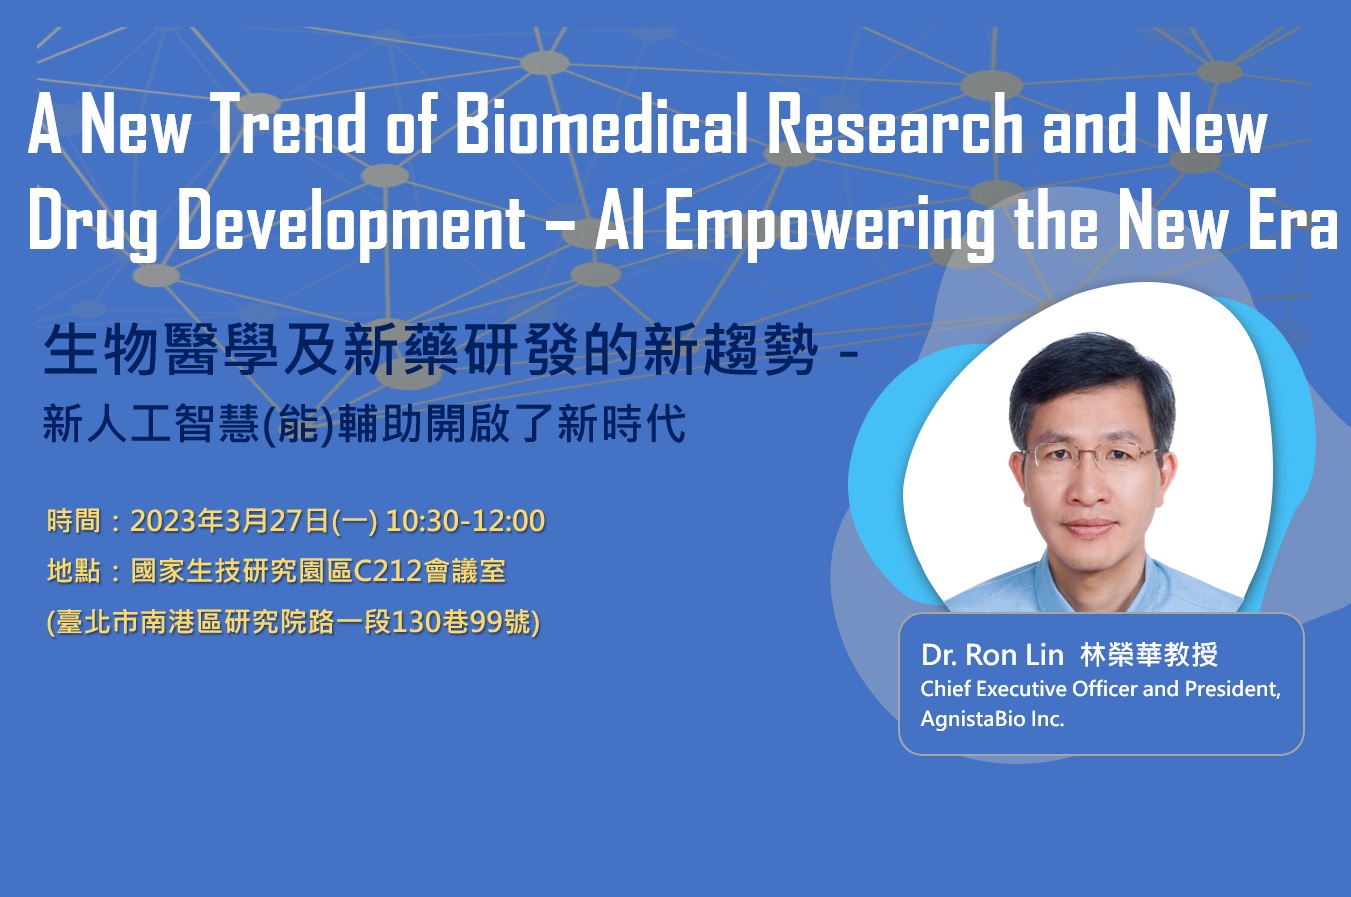 A New Trend of Biomedical Research and New Drug Development – AI Empowering the New Era